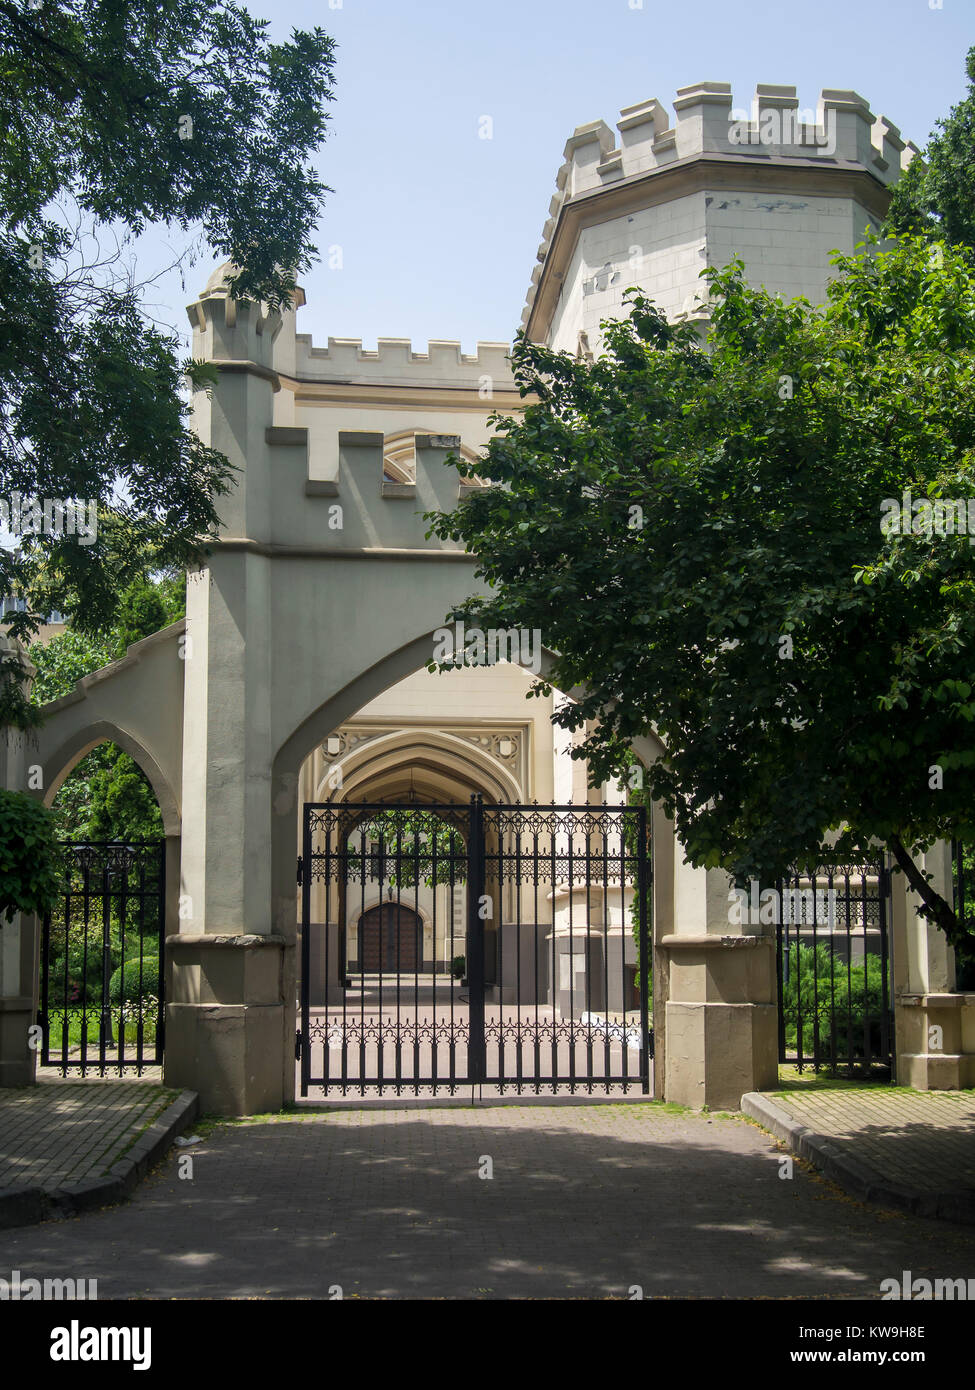 ODESSA, UKRAINE - JUNE 18, 2016: Entrance Gate to the Shah's Palace Stock Photo